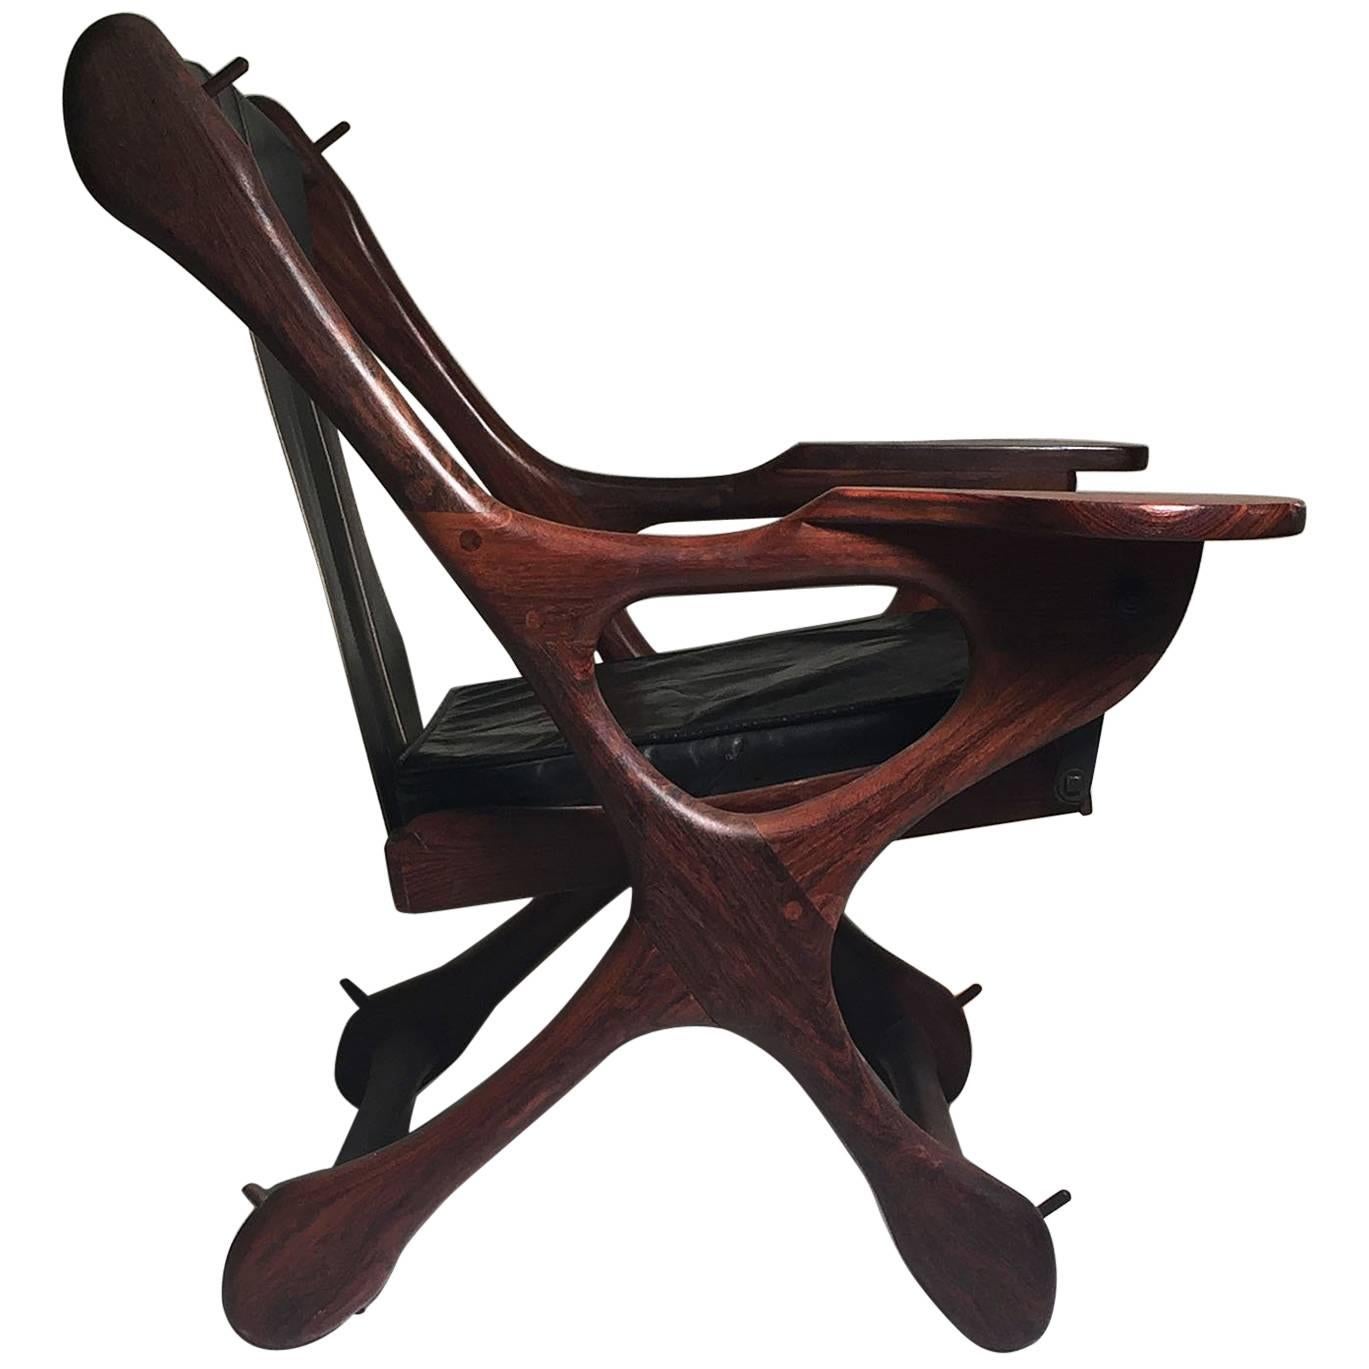 Vintage Don Shoemaker Rosewood Swinger Chair Signed Senal, Mexico